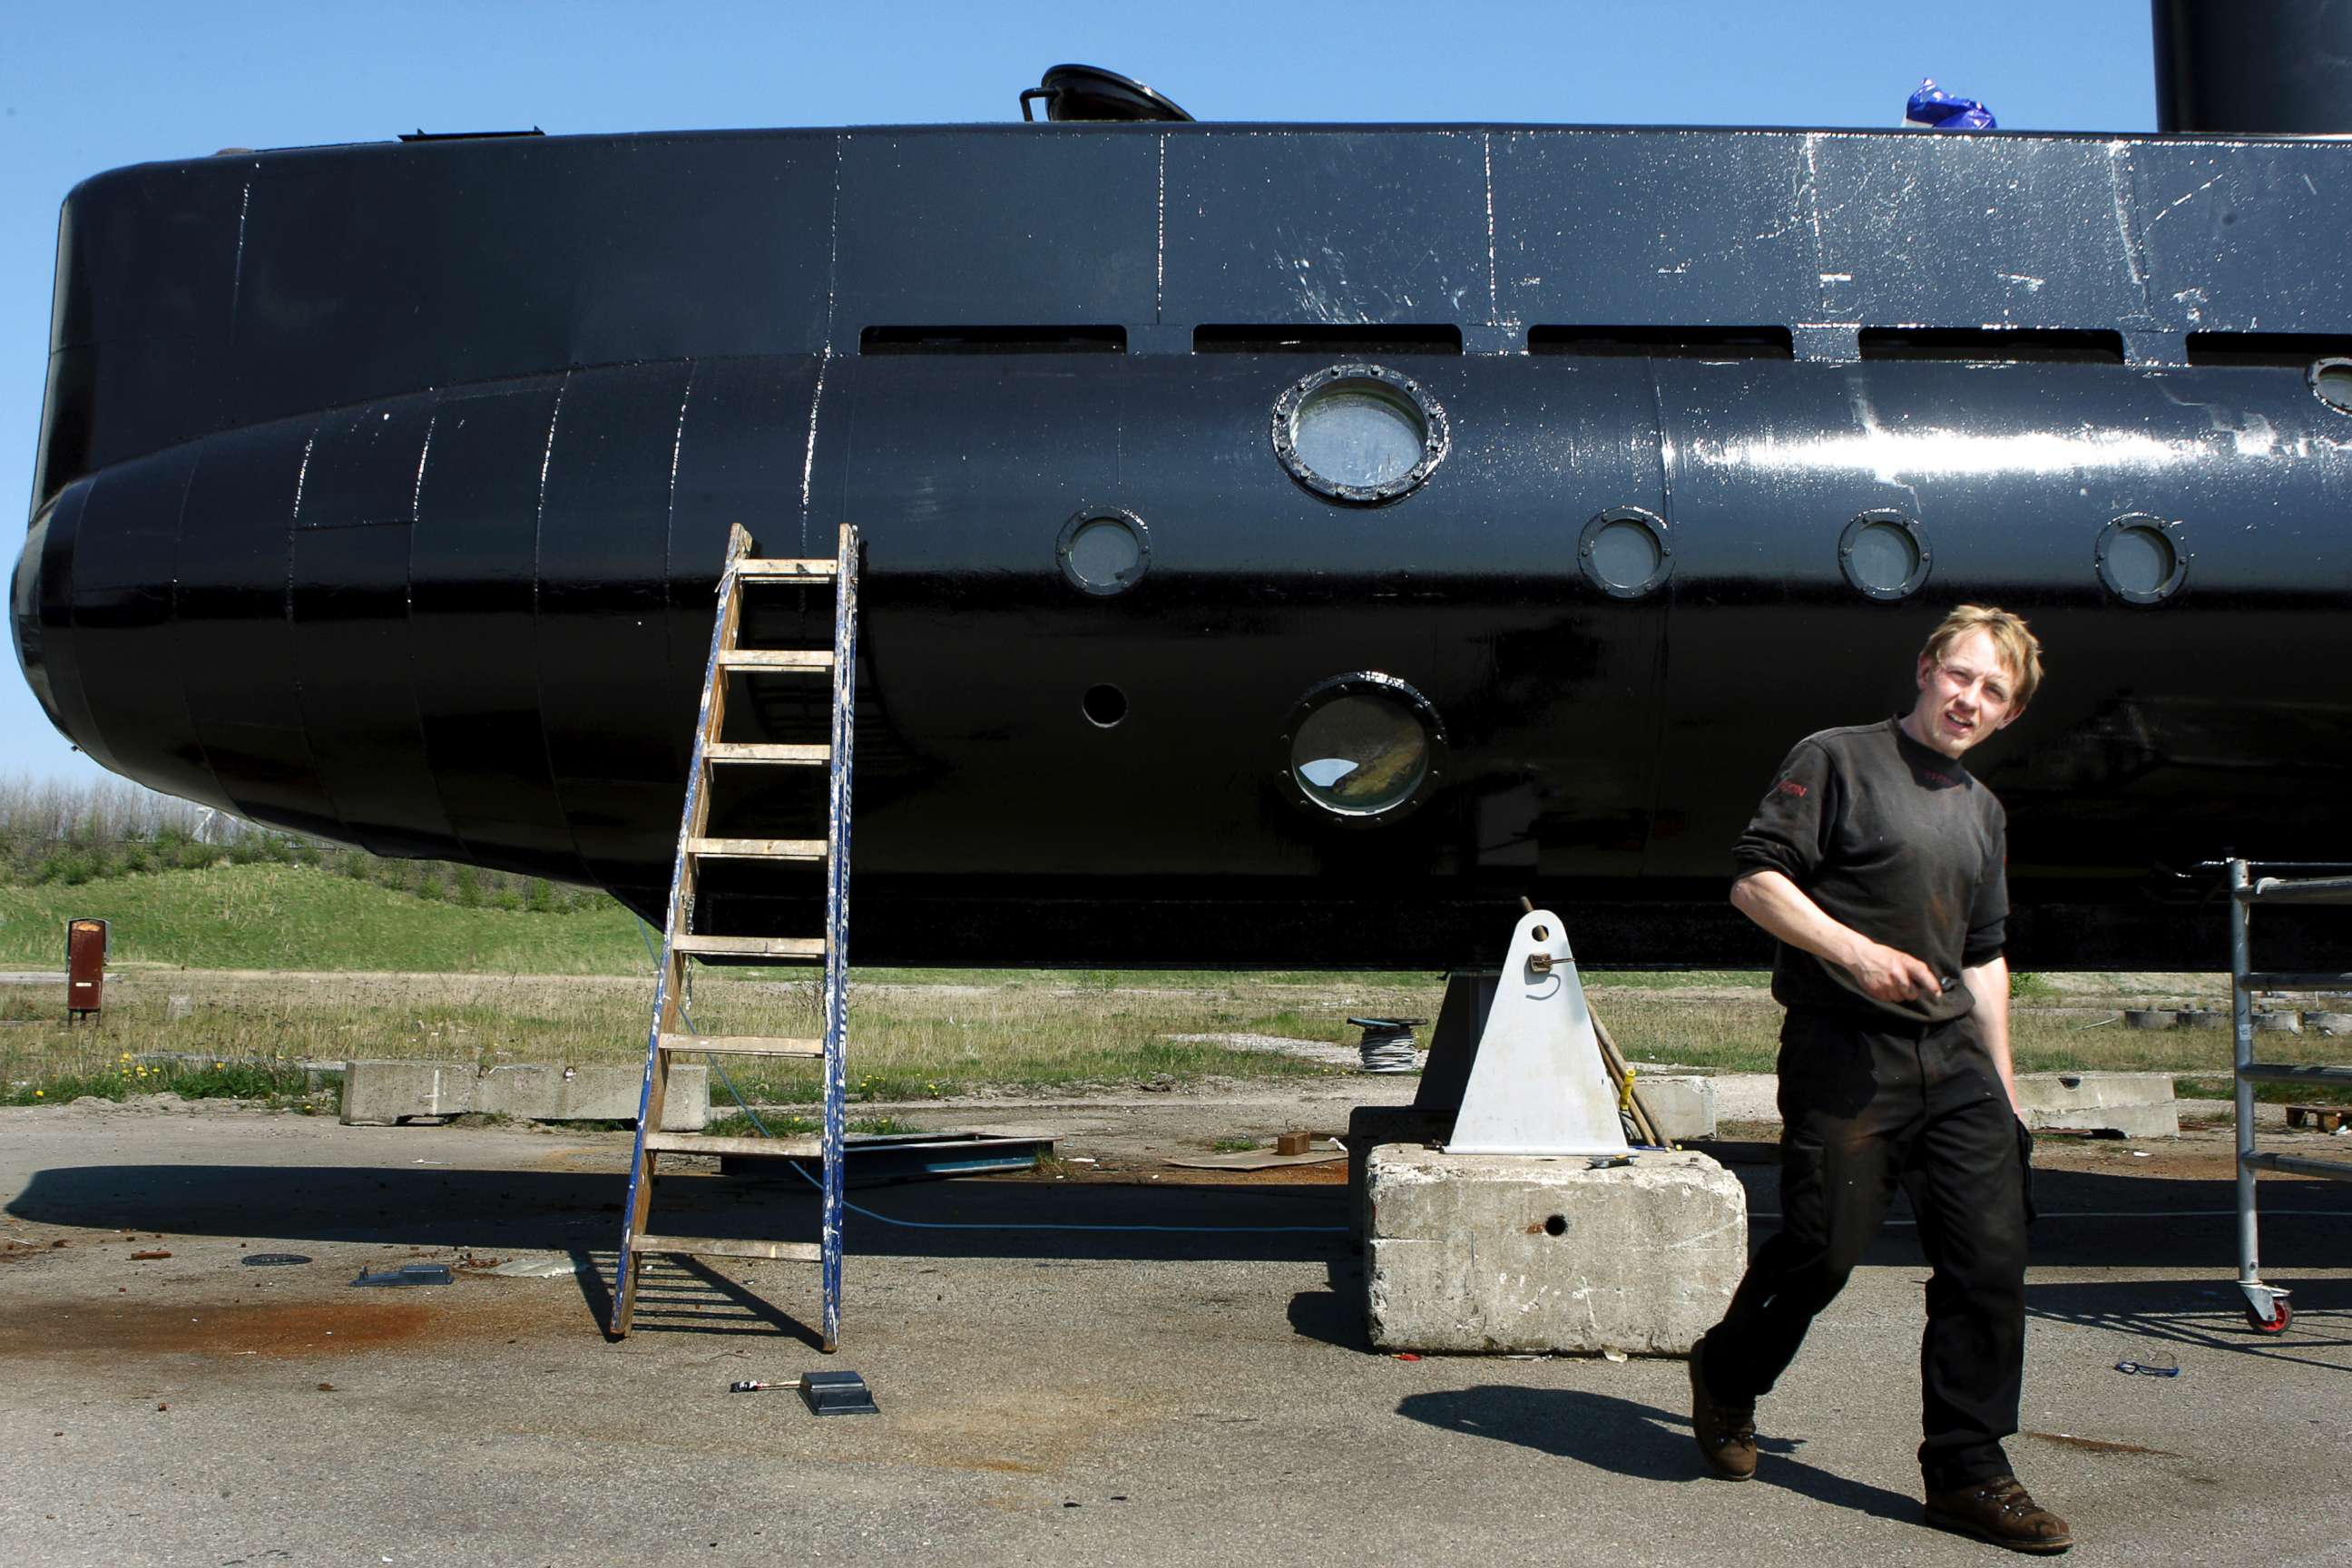 PHOTO: This April 30, 2008 file photo shows a submarine and its owner Peter Madsen. Peter Madsen stands trial at Copenhagen's City Court on March 8, 2018, for the killing of Kim Wall, 30, in his submarine off the usually quiet northern European country.